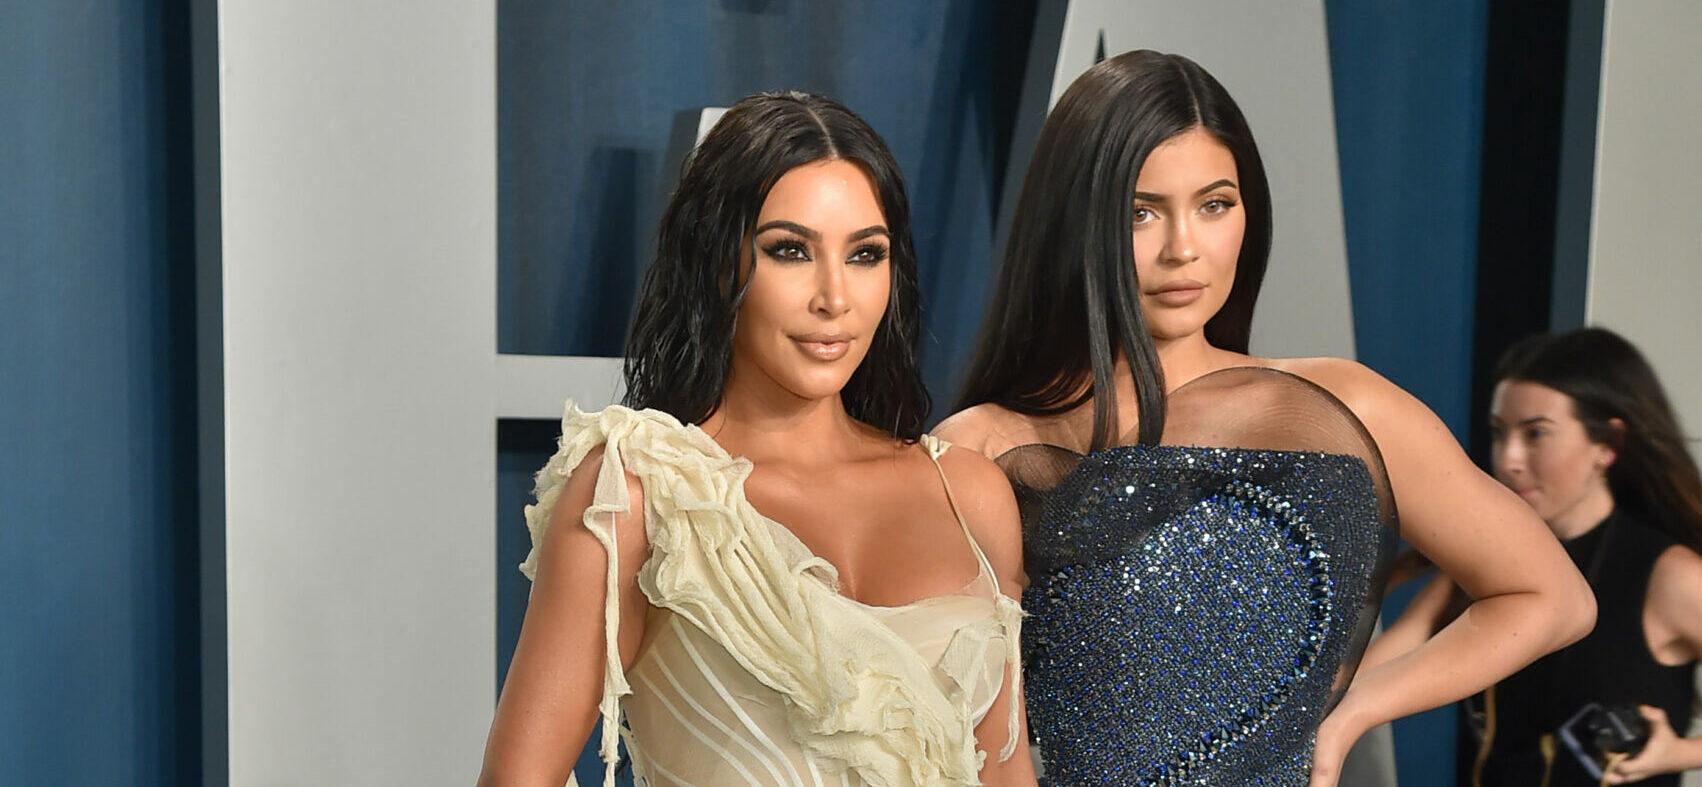 Kylie Jenner models a SKIMS top for sister Kim Kardashian with